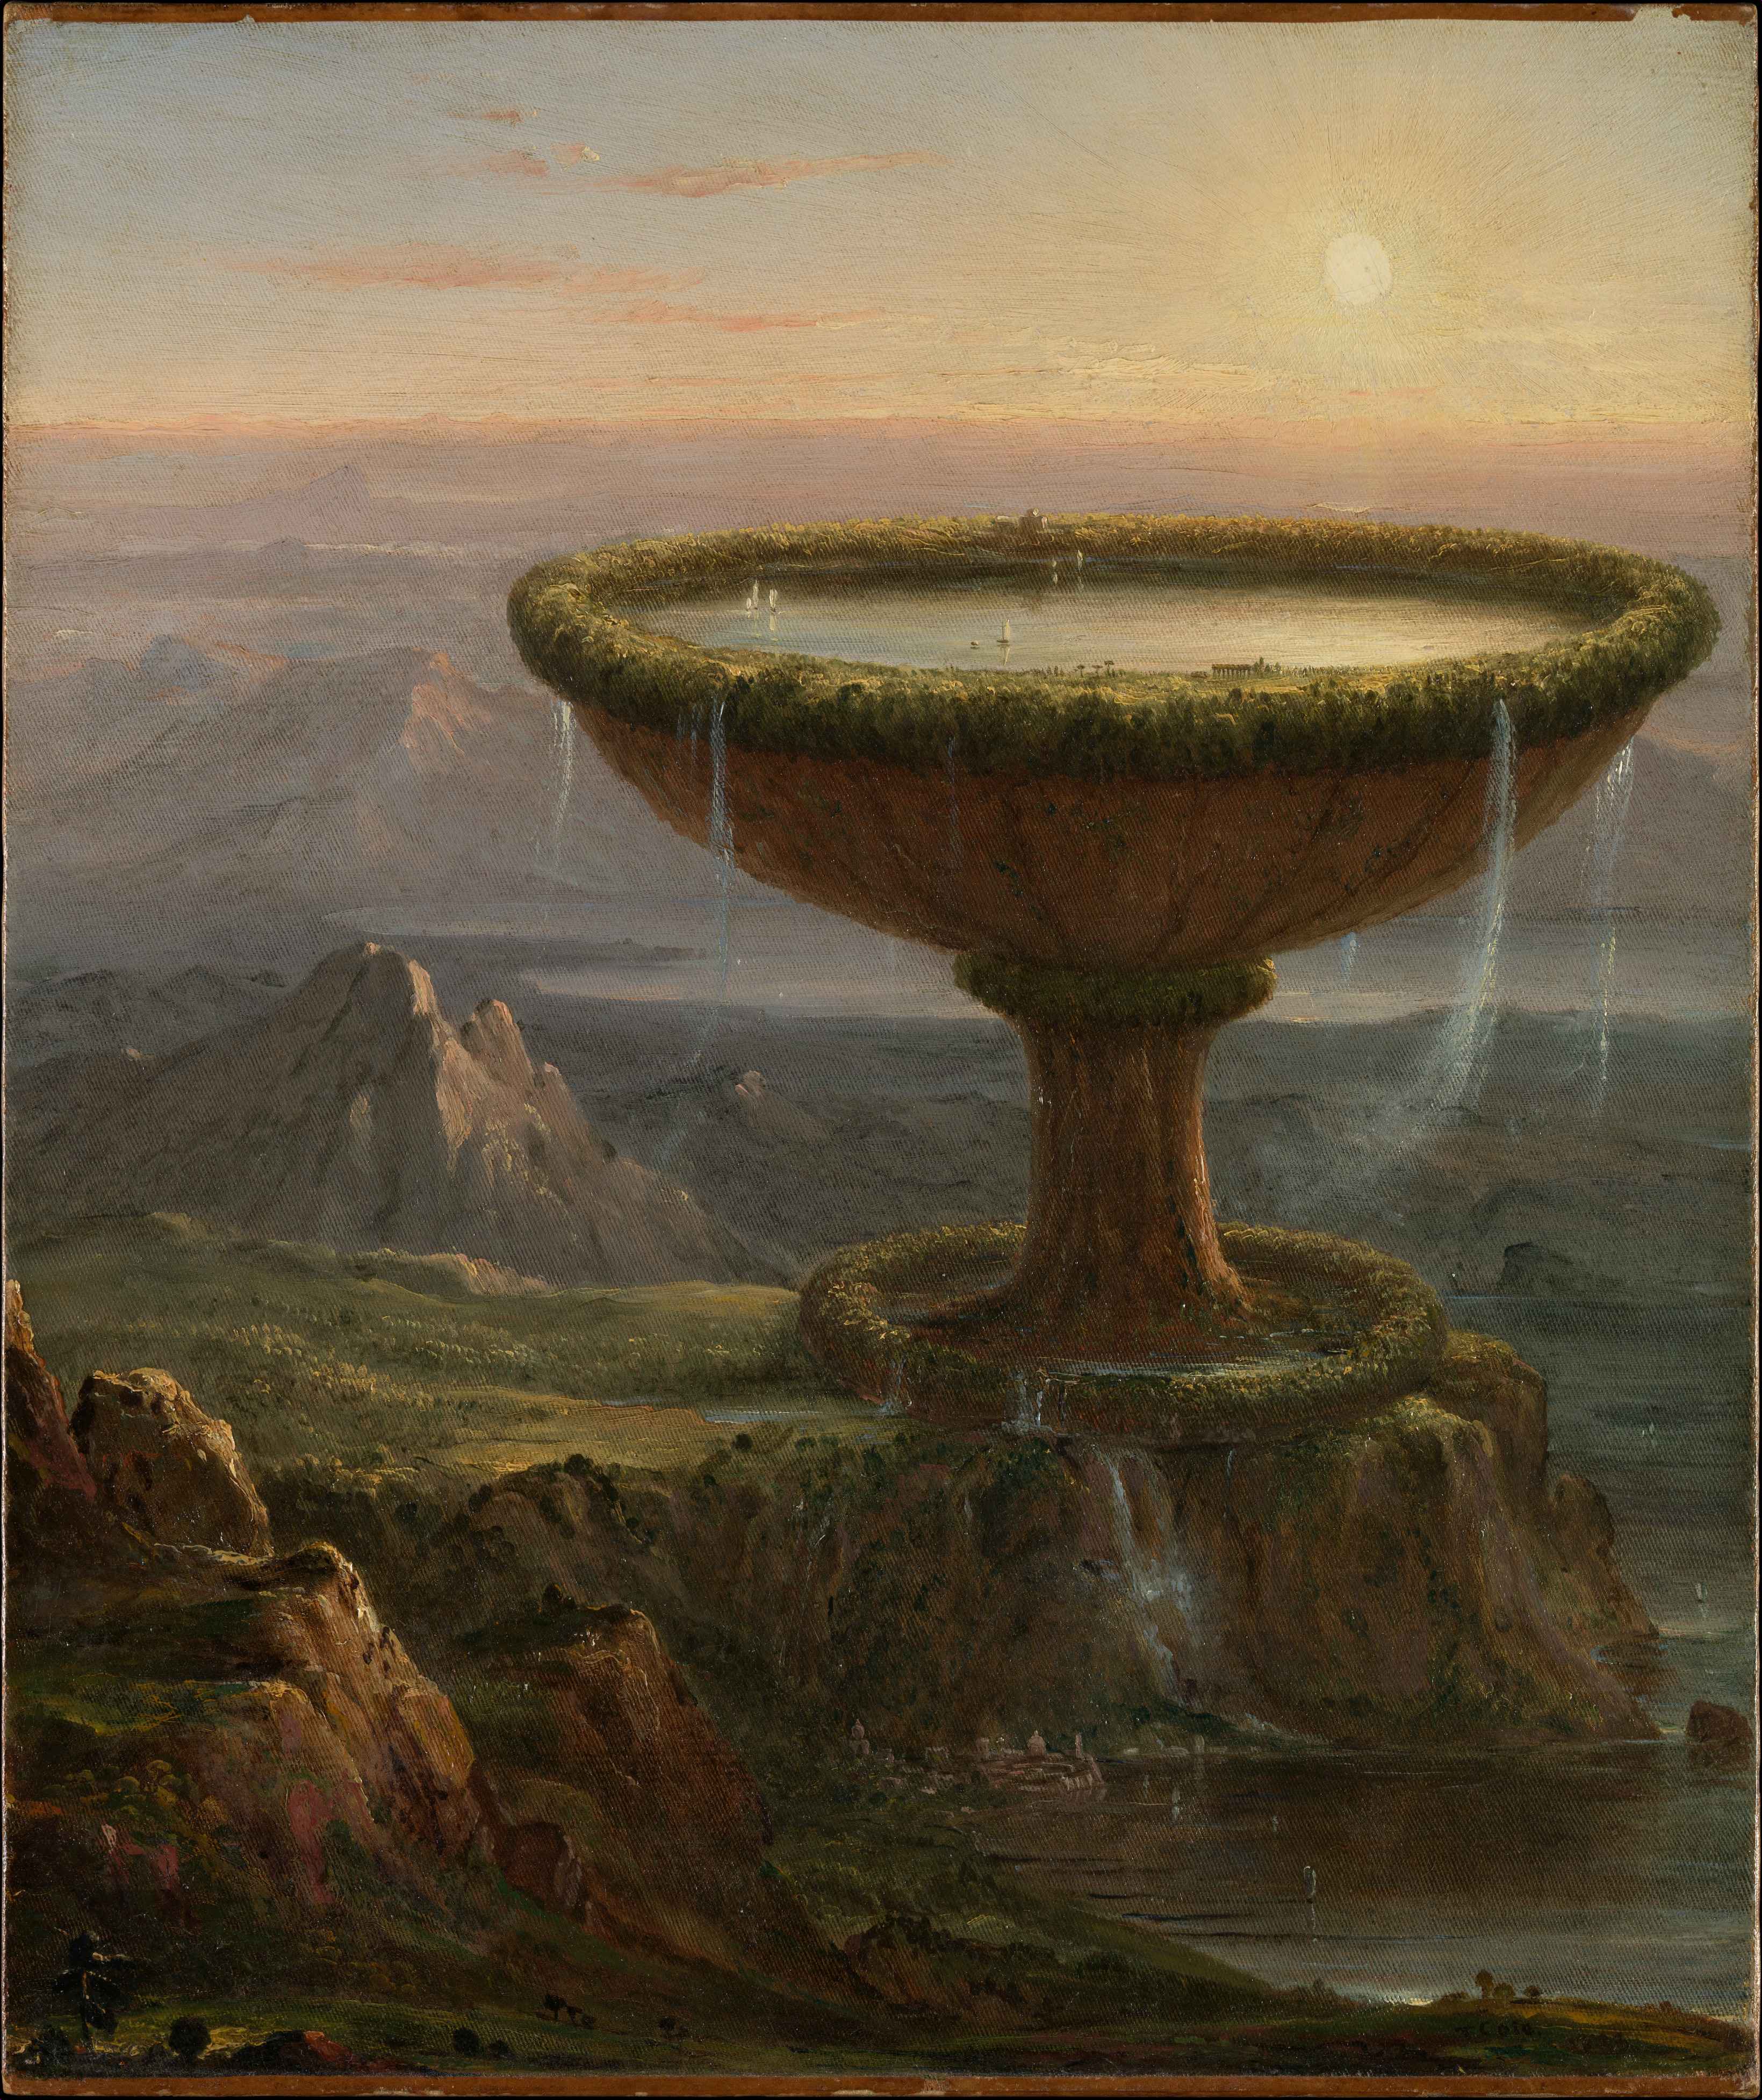 The Titans Gobelet painting by Thomas Cole